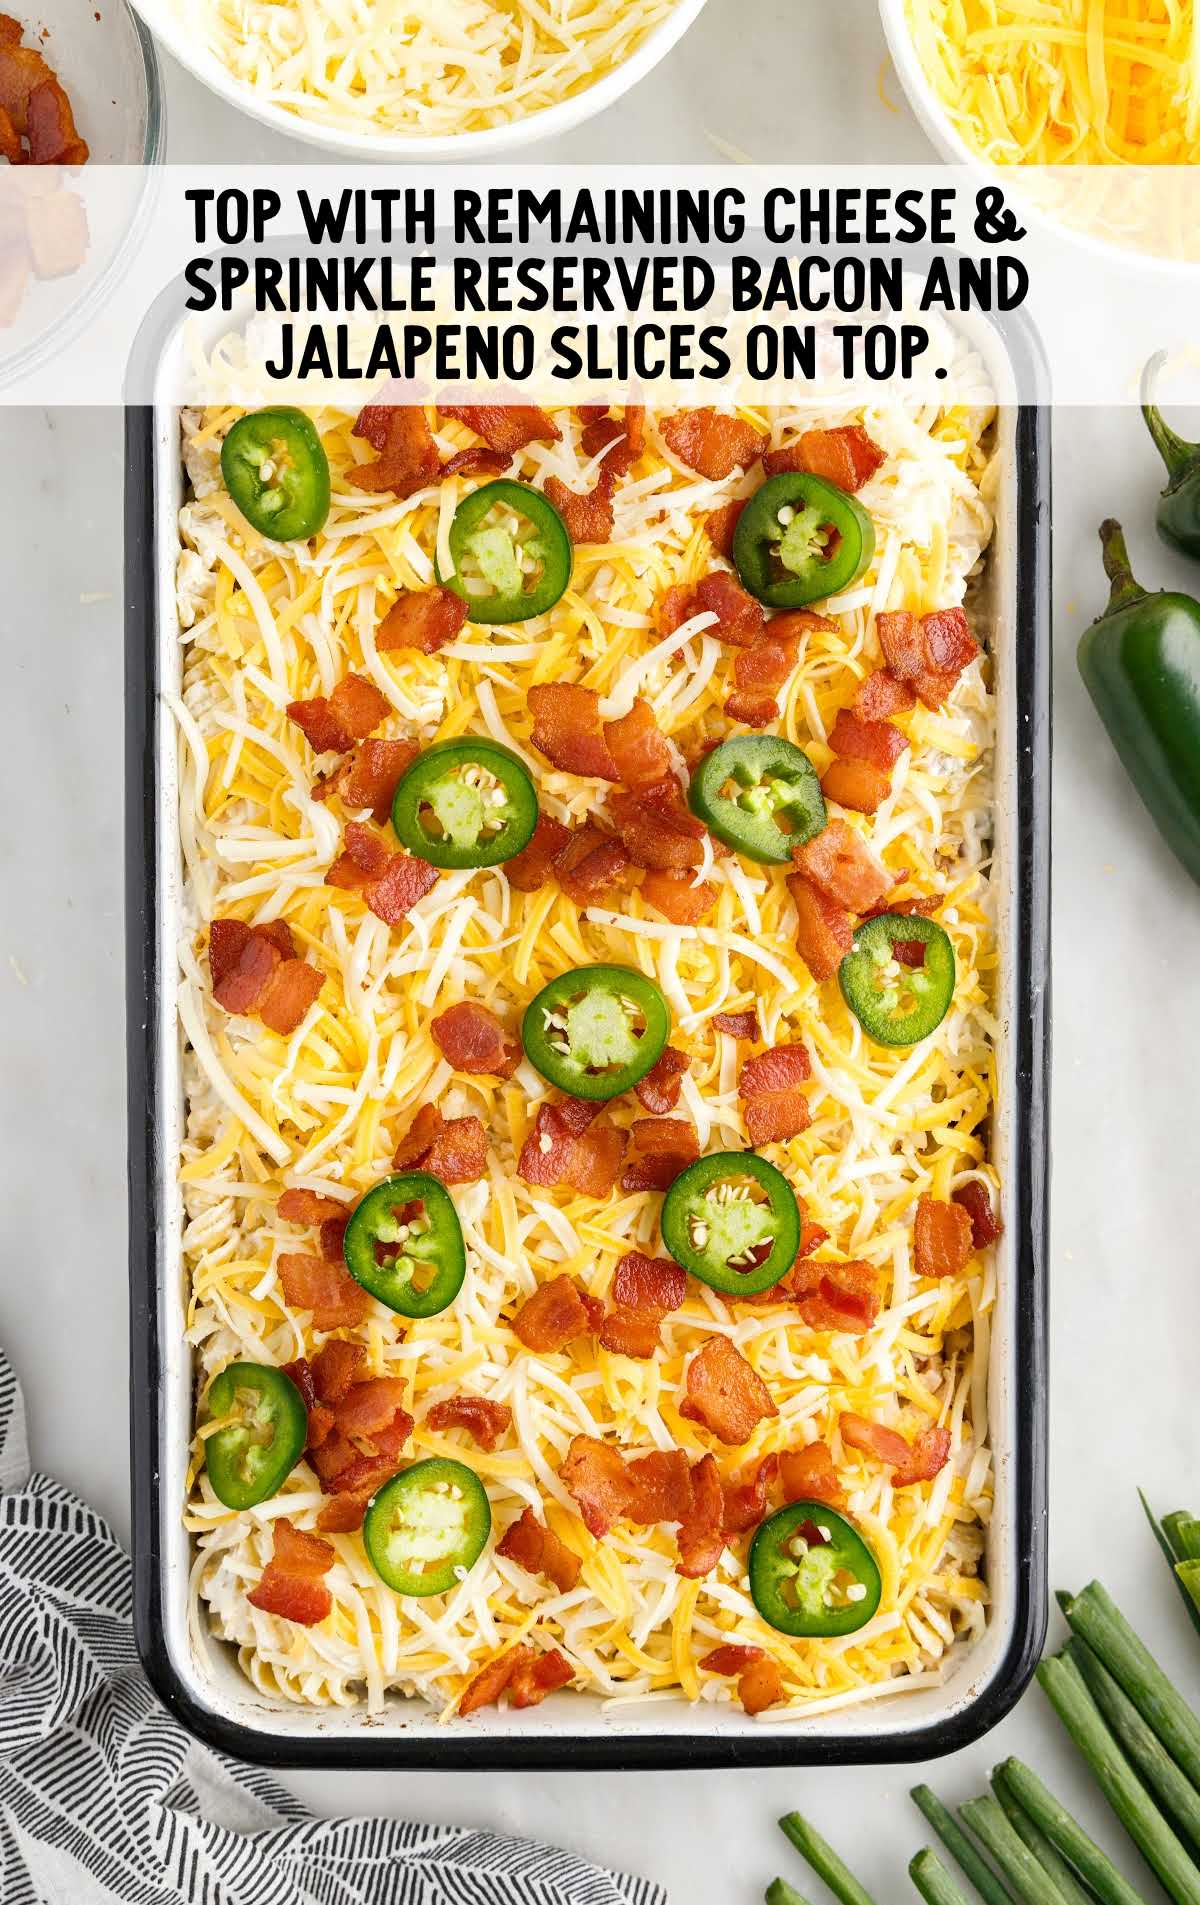 sprinkle cheese and place bacon and Jalapeño slices on top in a baking dish